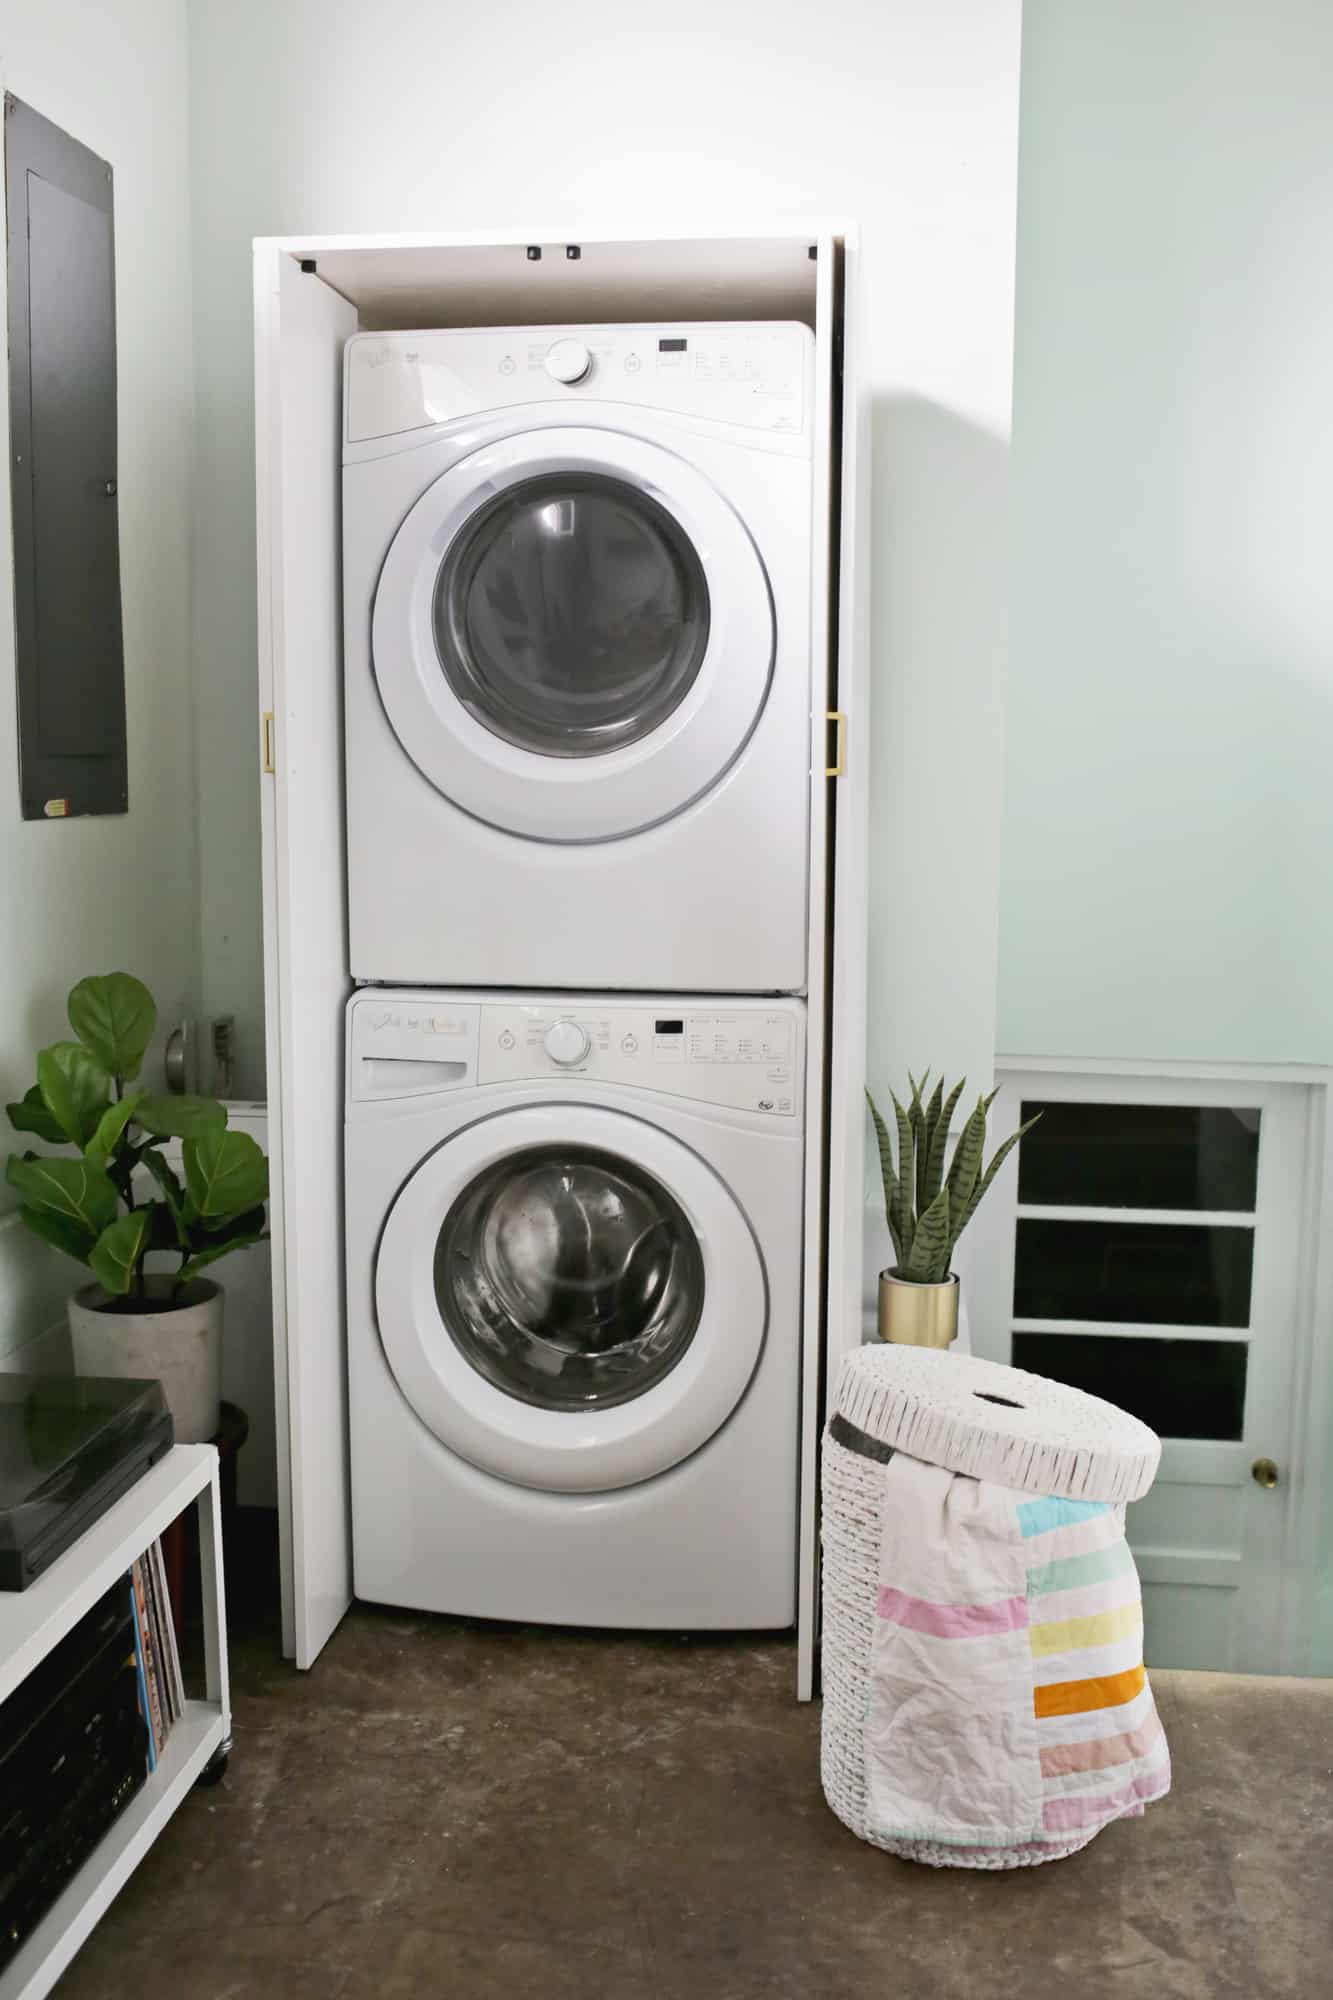 Washer And Dryer Cabinet A, Diy Cabinet To Hide Washer And Dryer